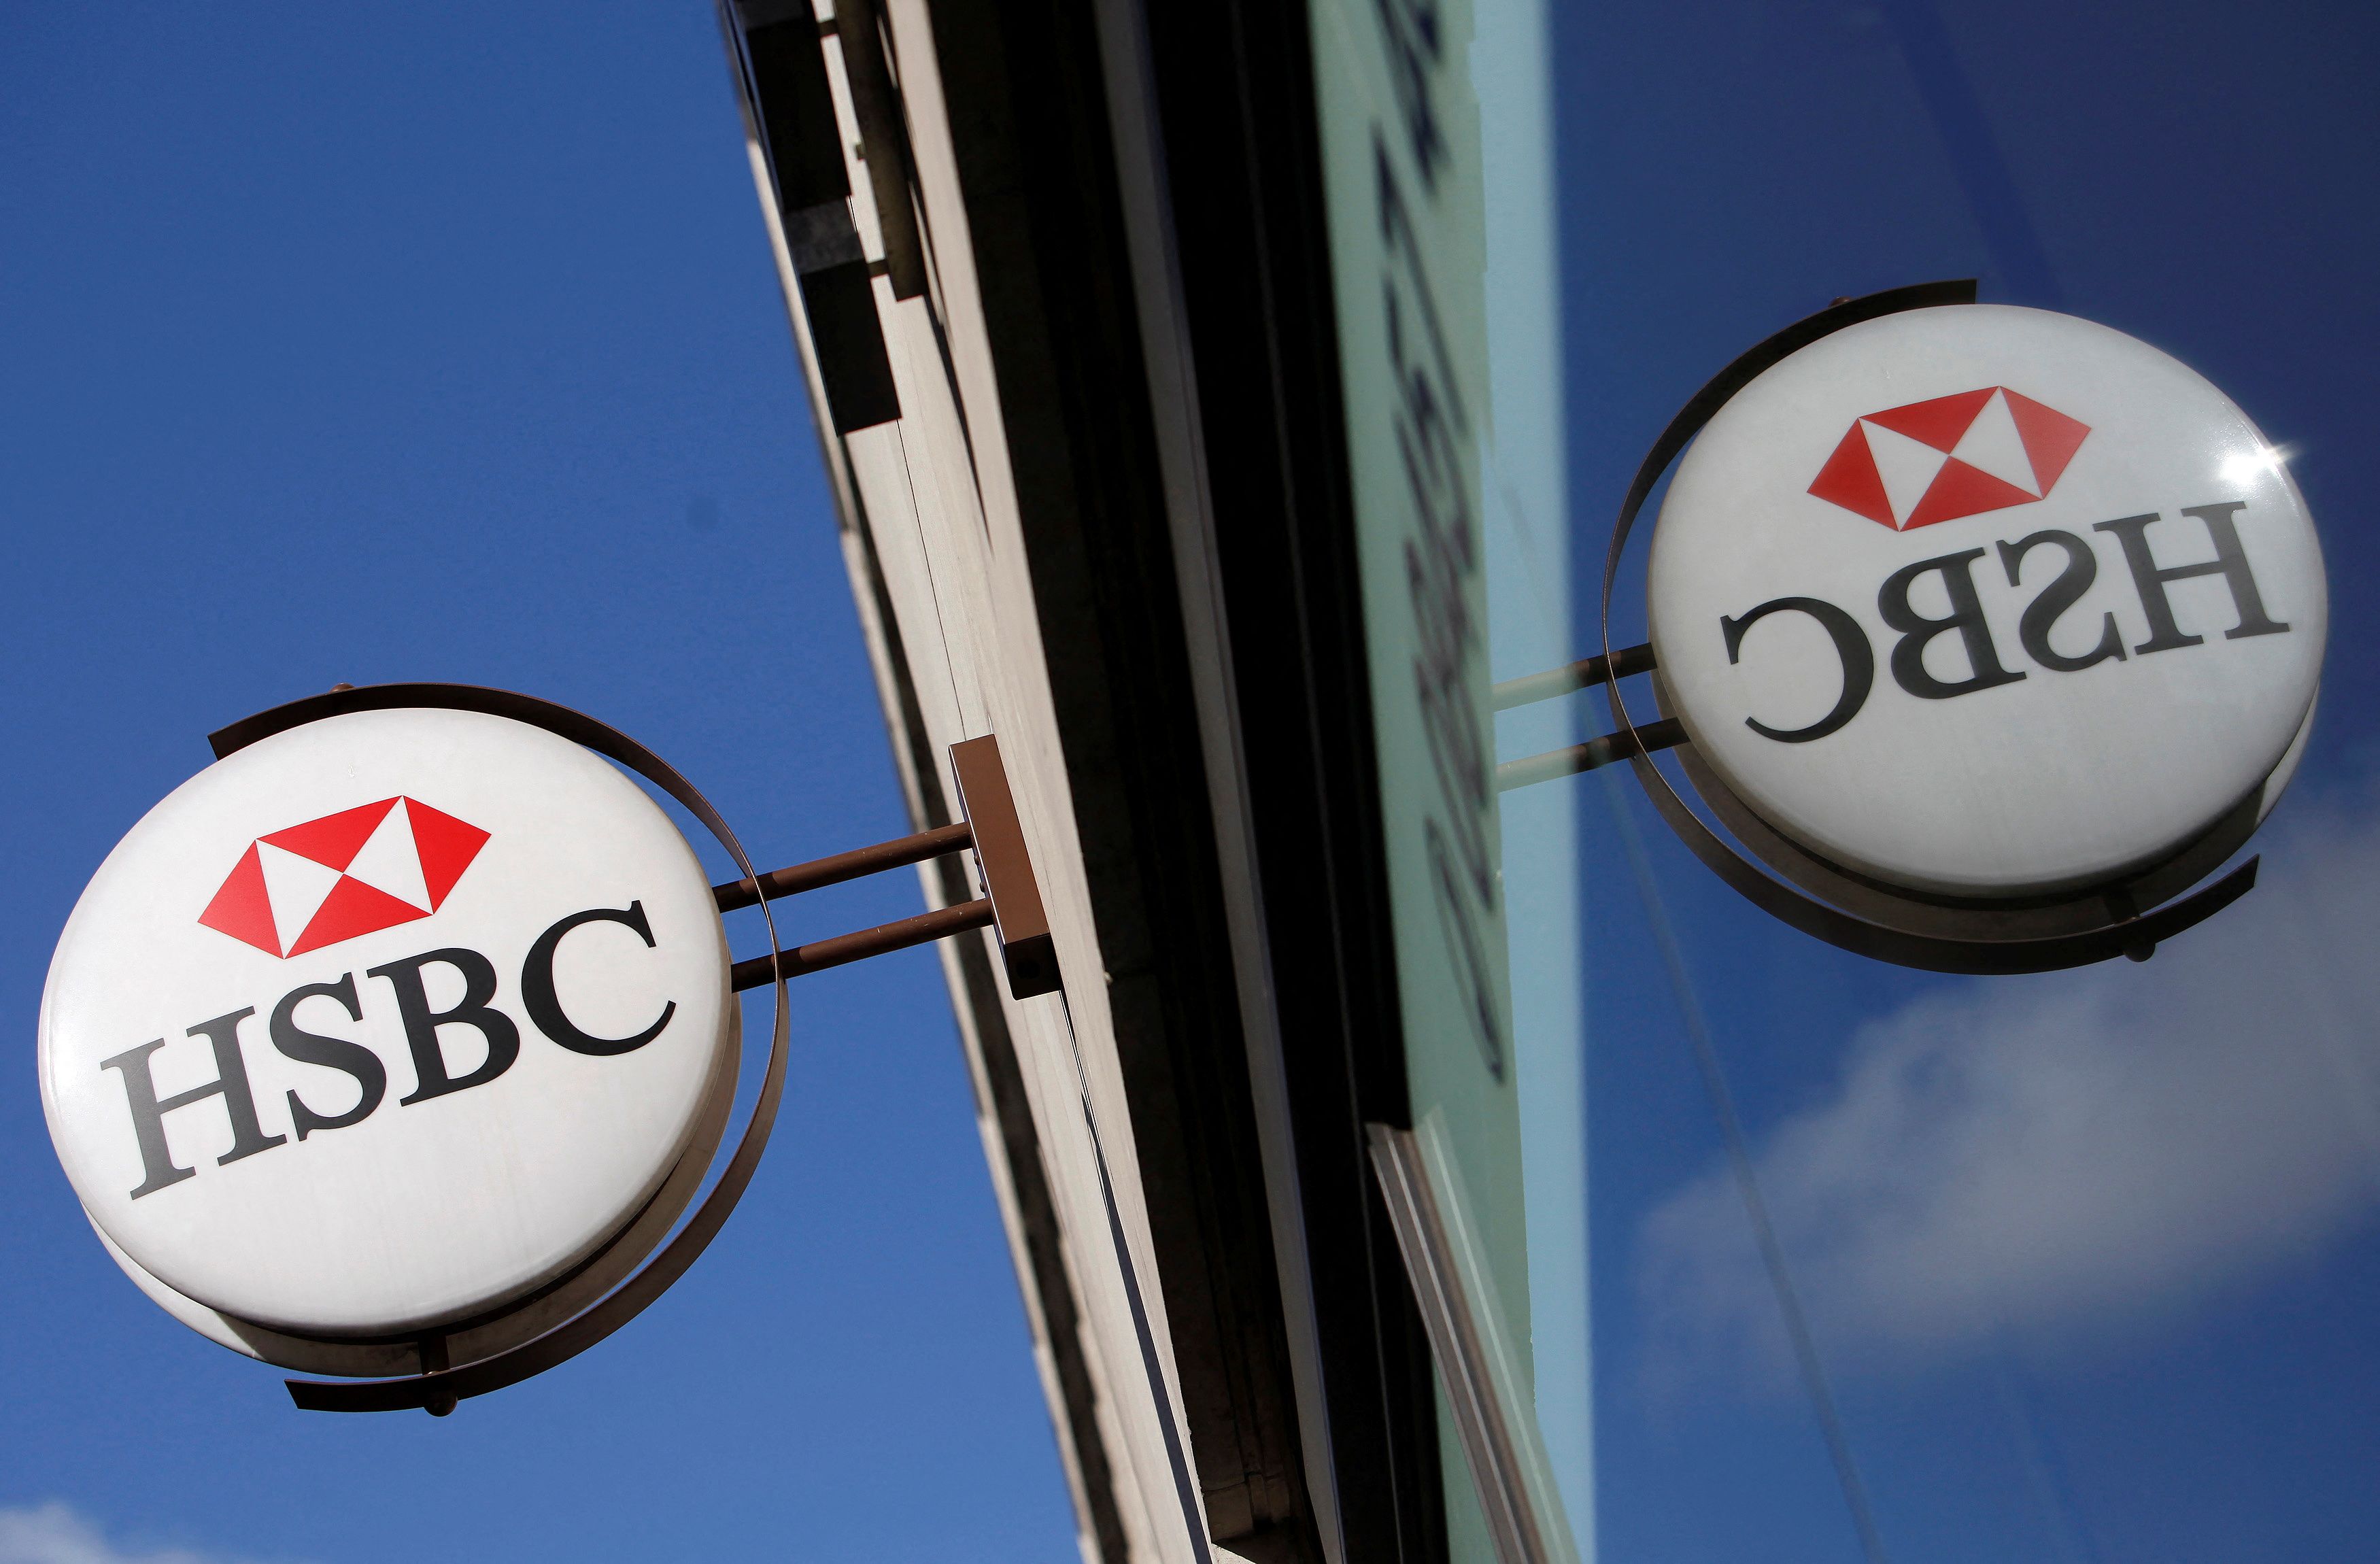 A branch of HSBC bank is seen in central London